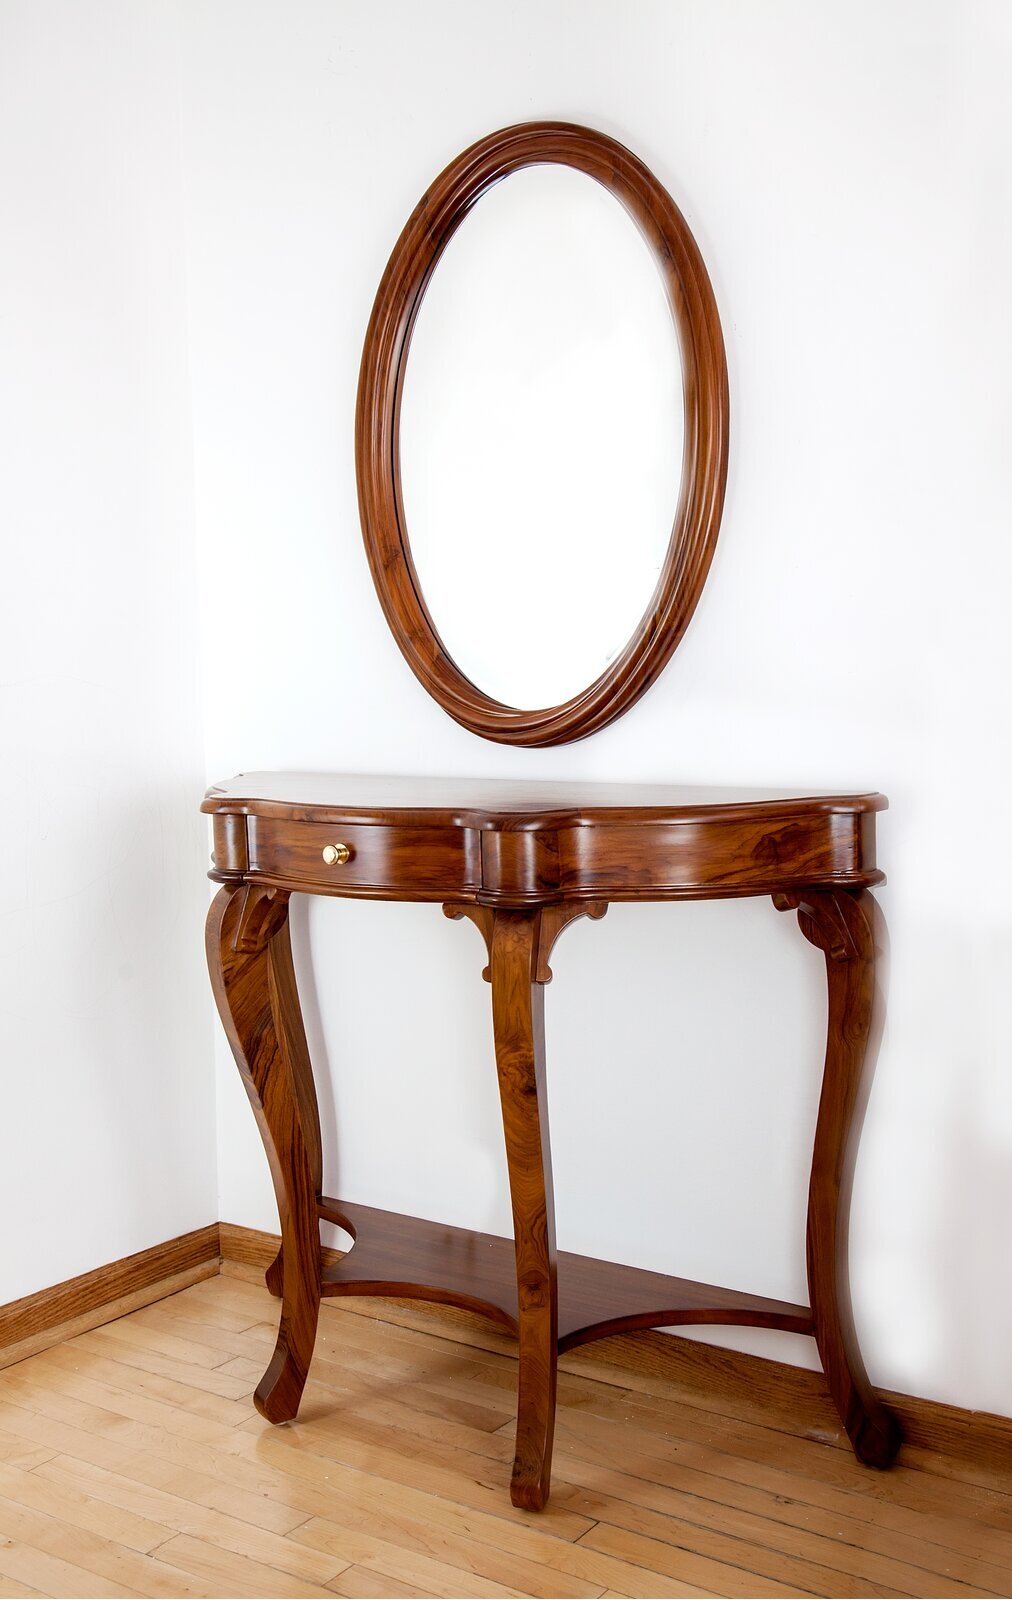 Console table with mirror in traditional style